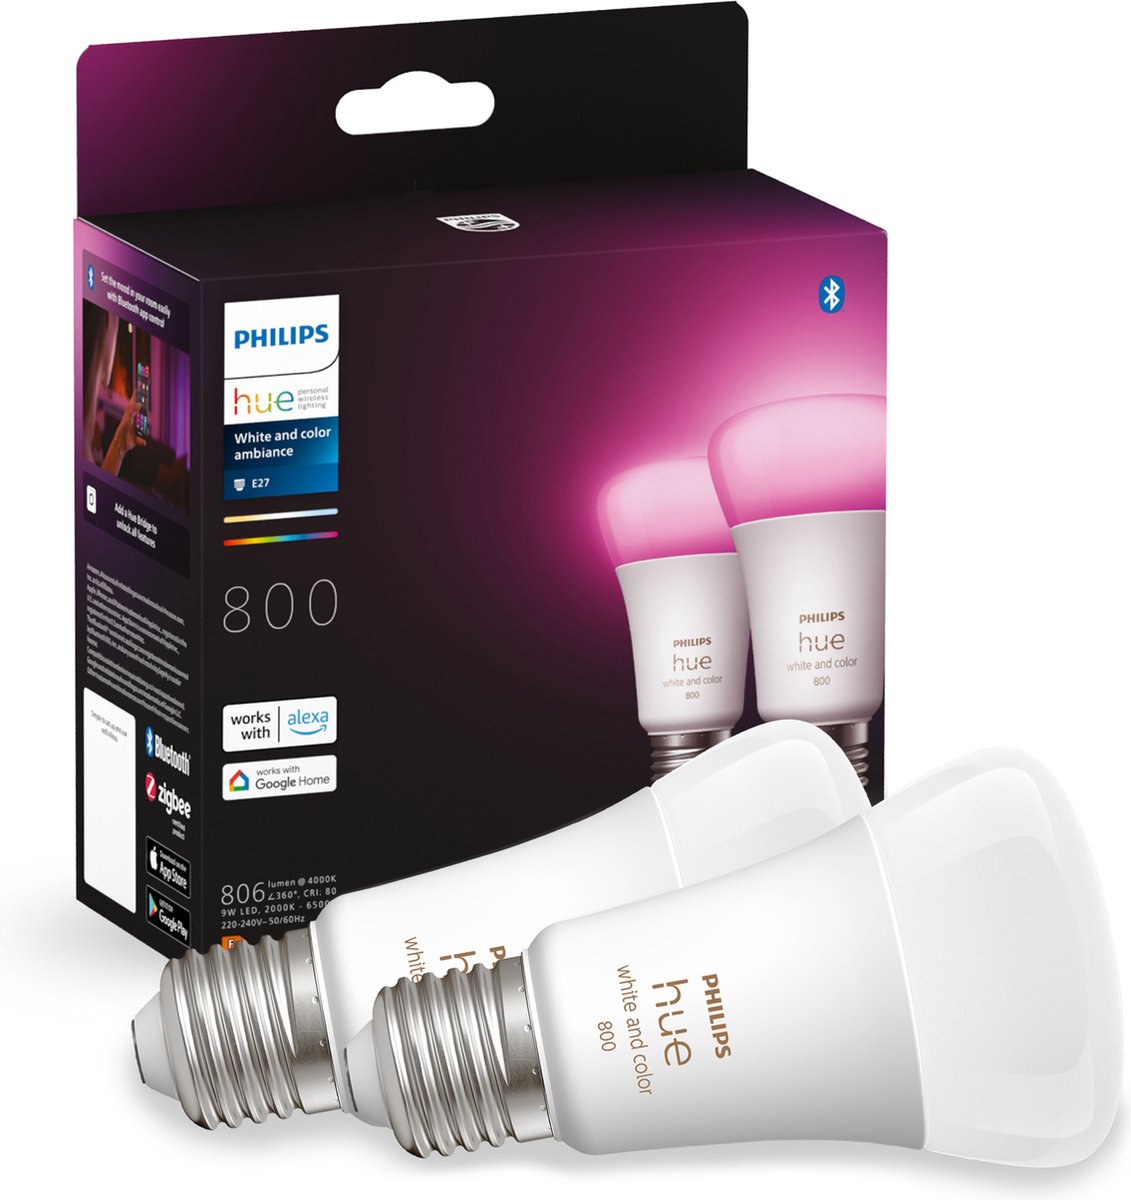 Philips Hue Slimme Lichtbron E27 Duopack - White and Color Ambiance - 6.5W  - Bluetooth... | bol.